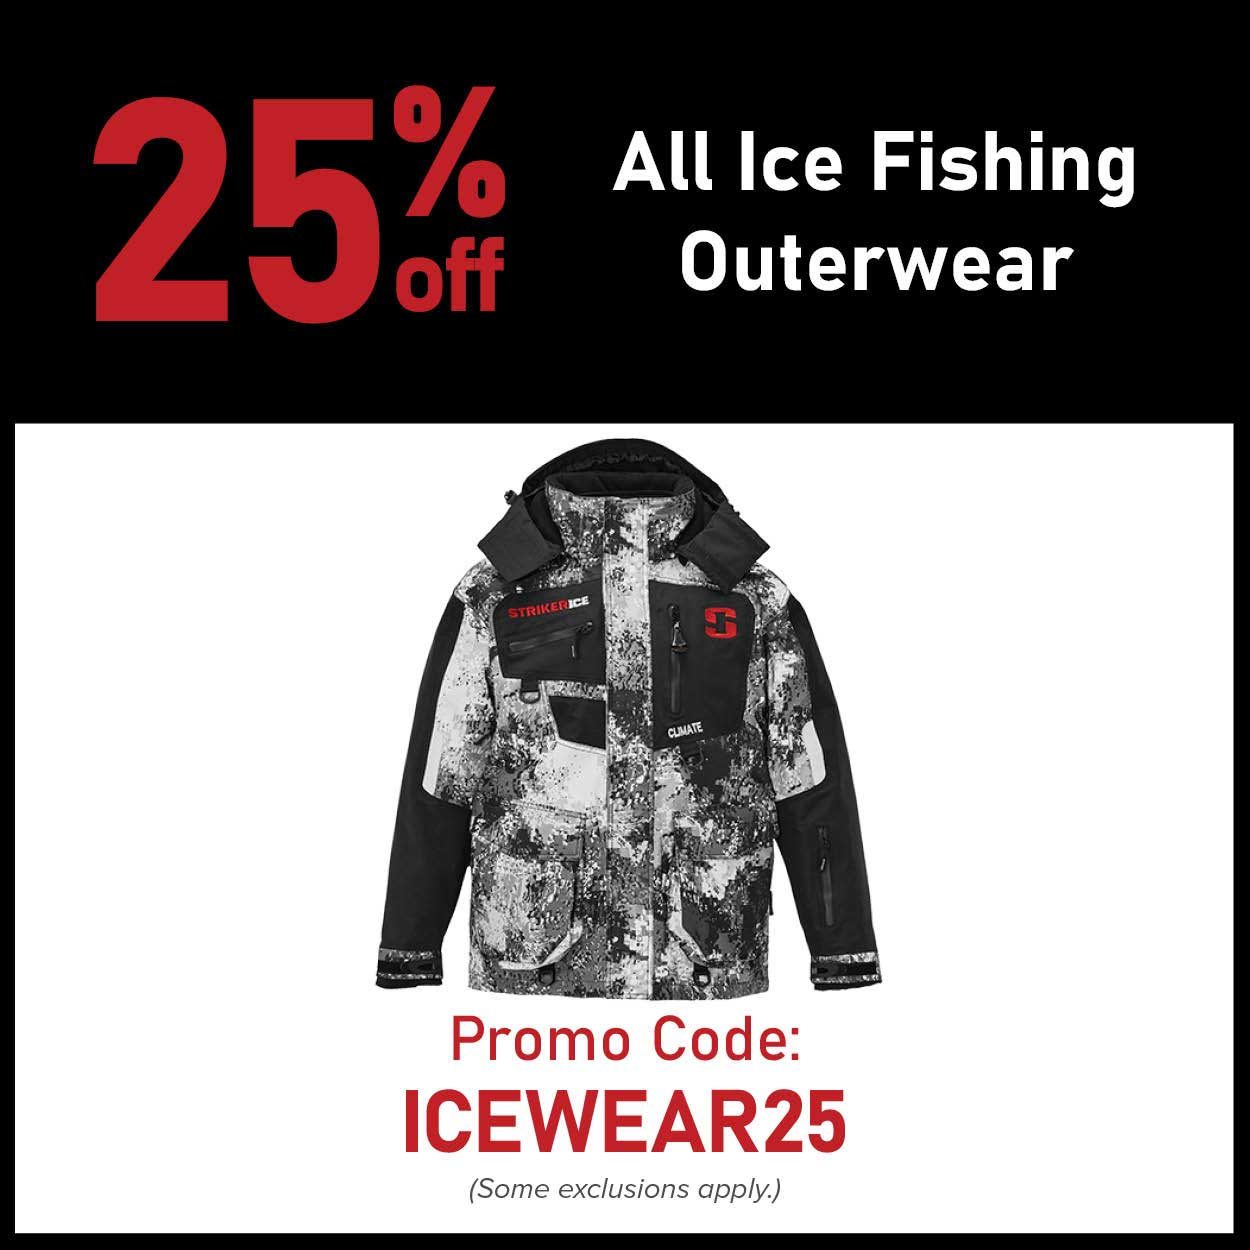 25% Off All Ice Fishing Outerwear Promo Code: ICEWEAR25 (Some Exclusions Apply)